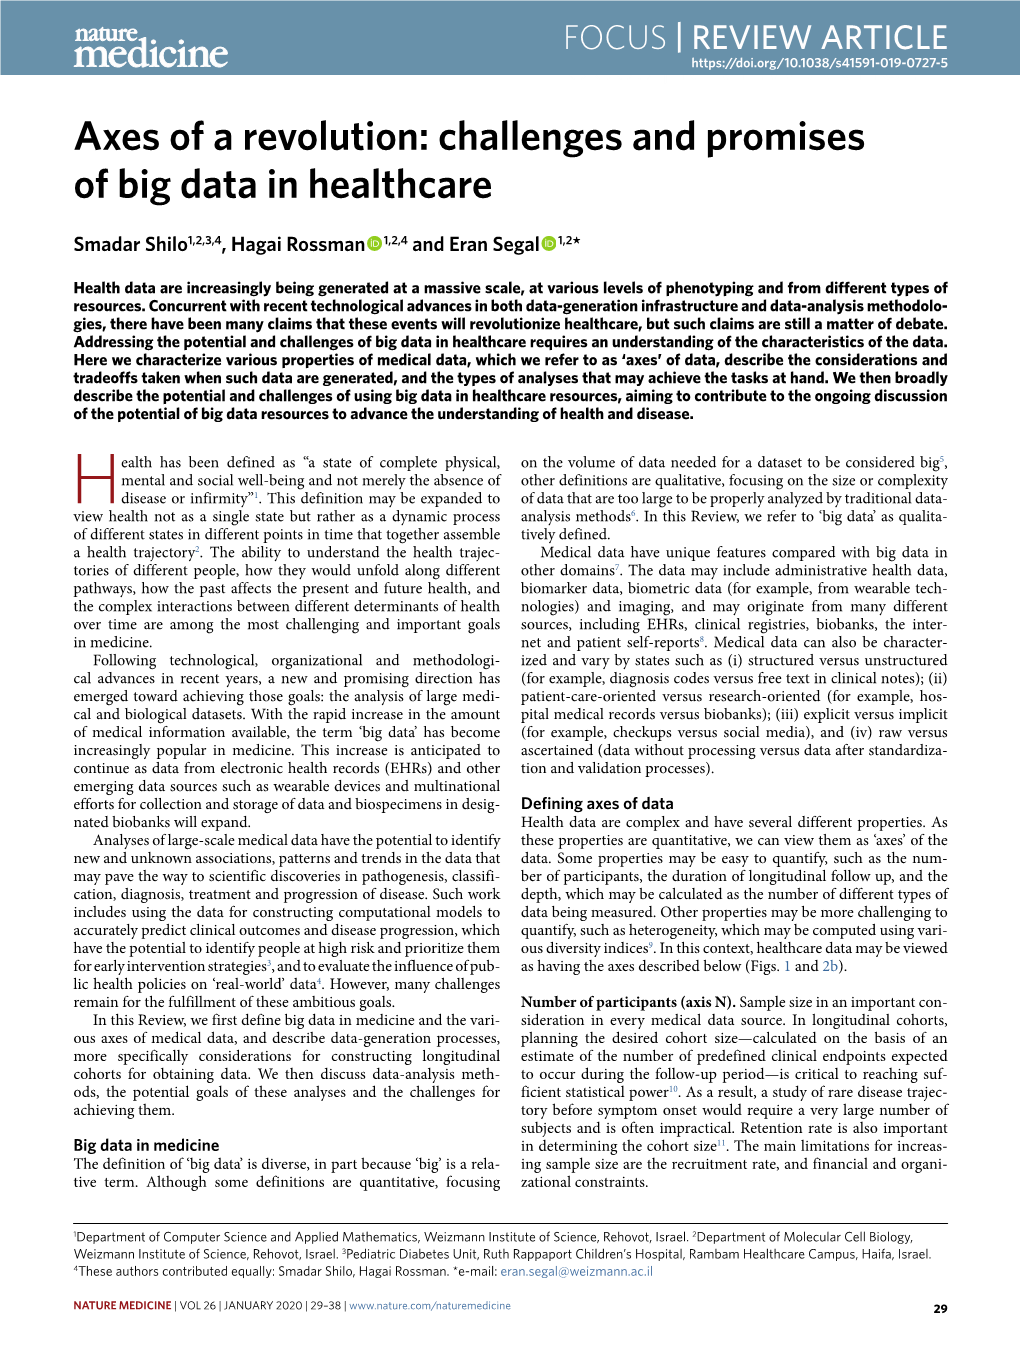 Challenges and Promises of Big Data in Healthcare